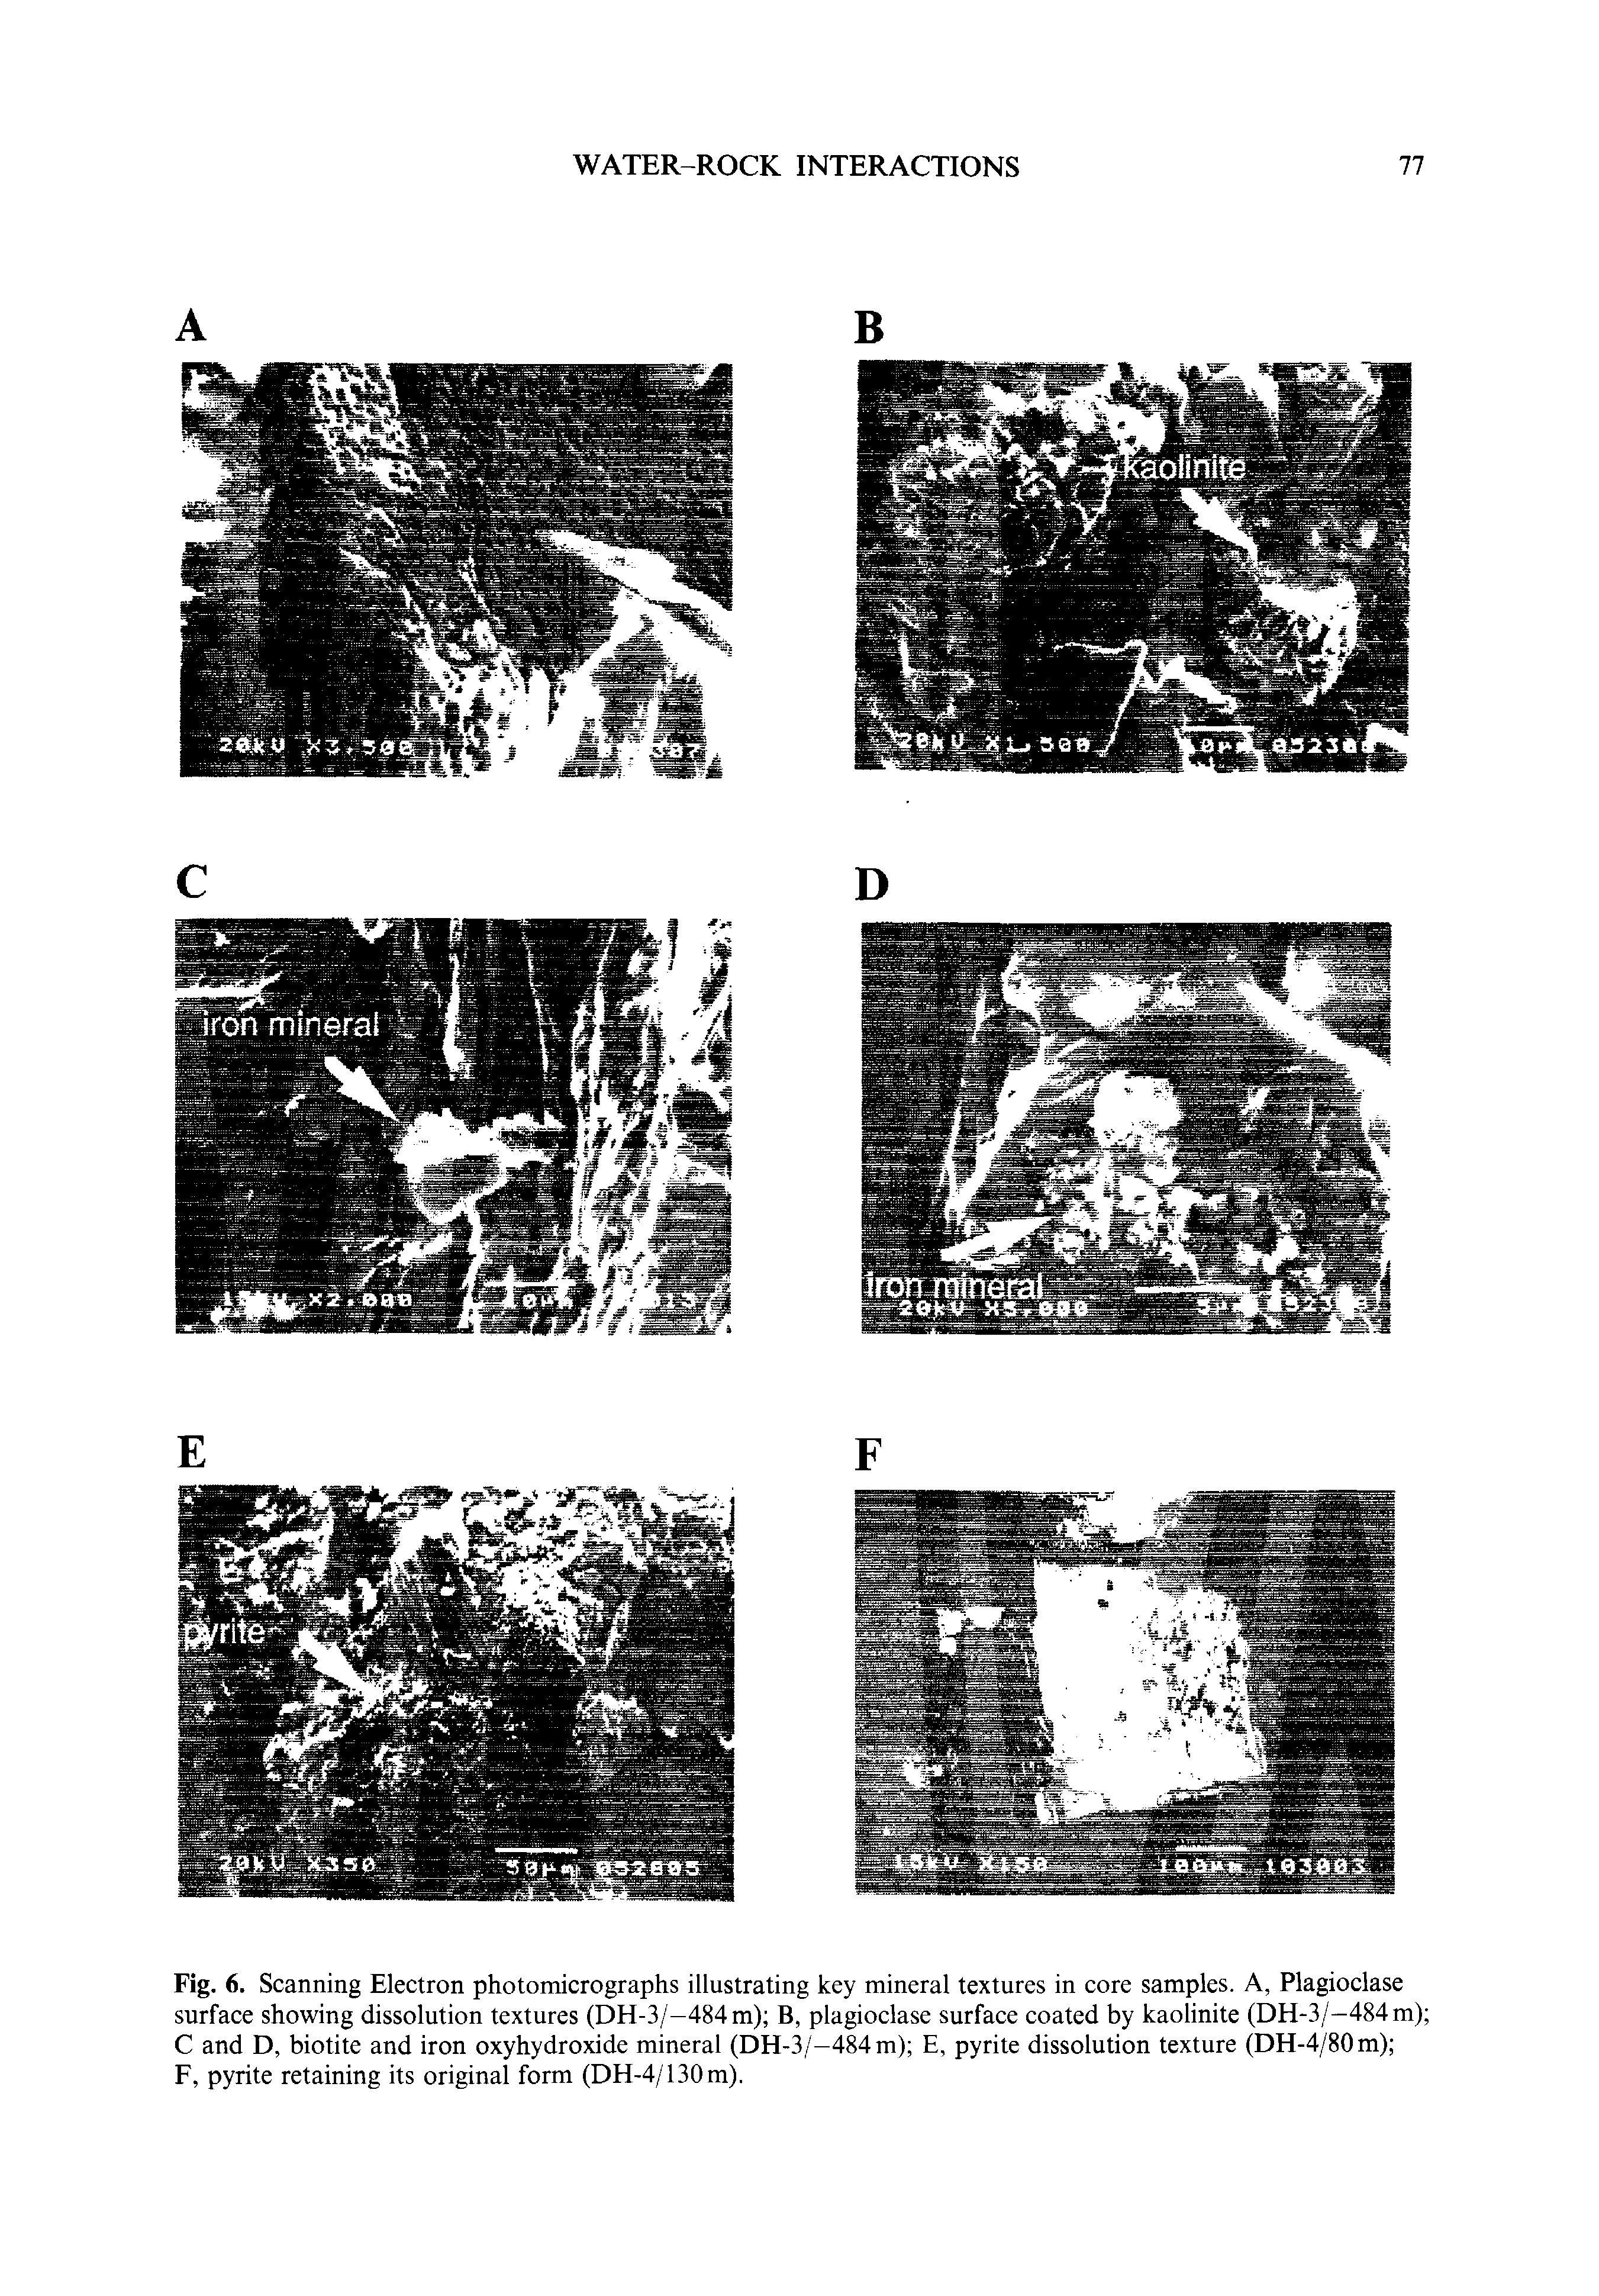 Fig. 6. Scanning Electron photomicrographs illustrating key mineral textures in core samples. A, Plagioclase surface showing dissolution textures (DH-3/-484m) B, plagioclase surface coated by kaolinite (DH-3/-484m) C and D, biotite and iron oxyhydroxide mineral (DH-3/-484m) E, pyrite dissolution texture (DH-4/80m) ...